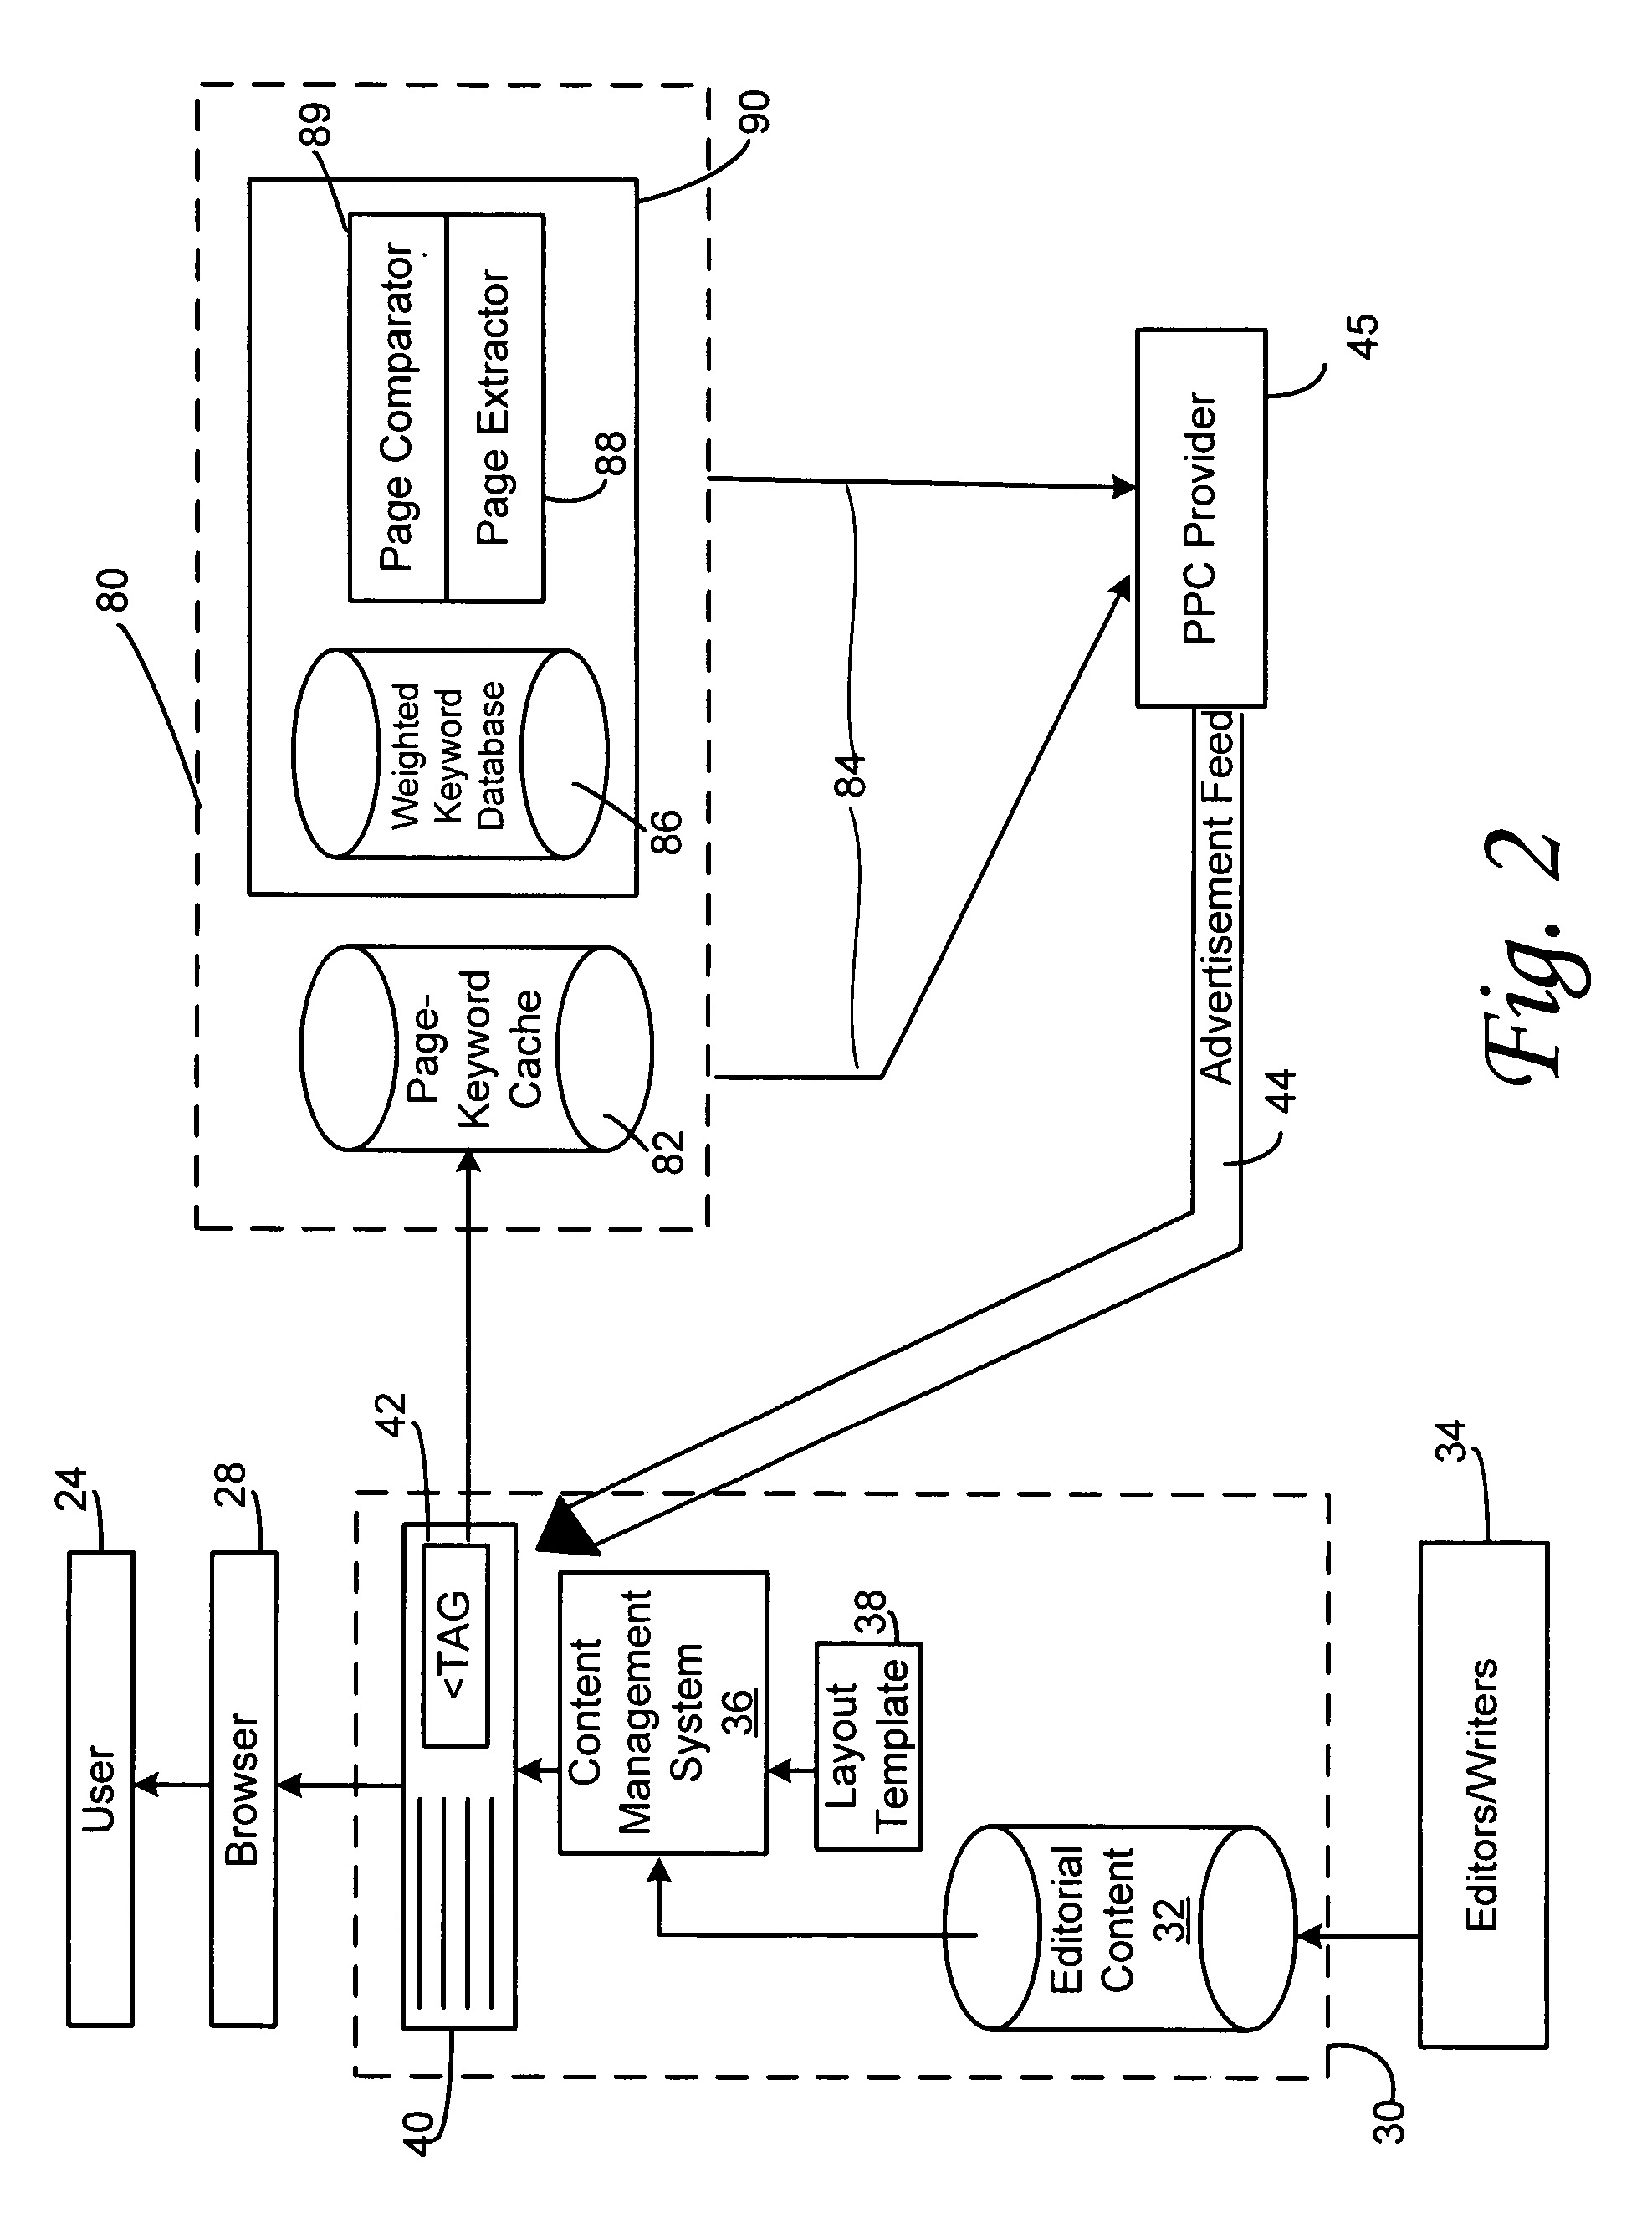 Method and system for contextual advertisement delivery